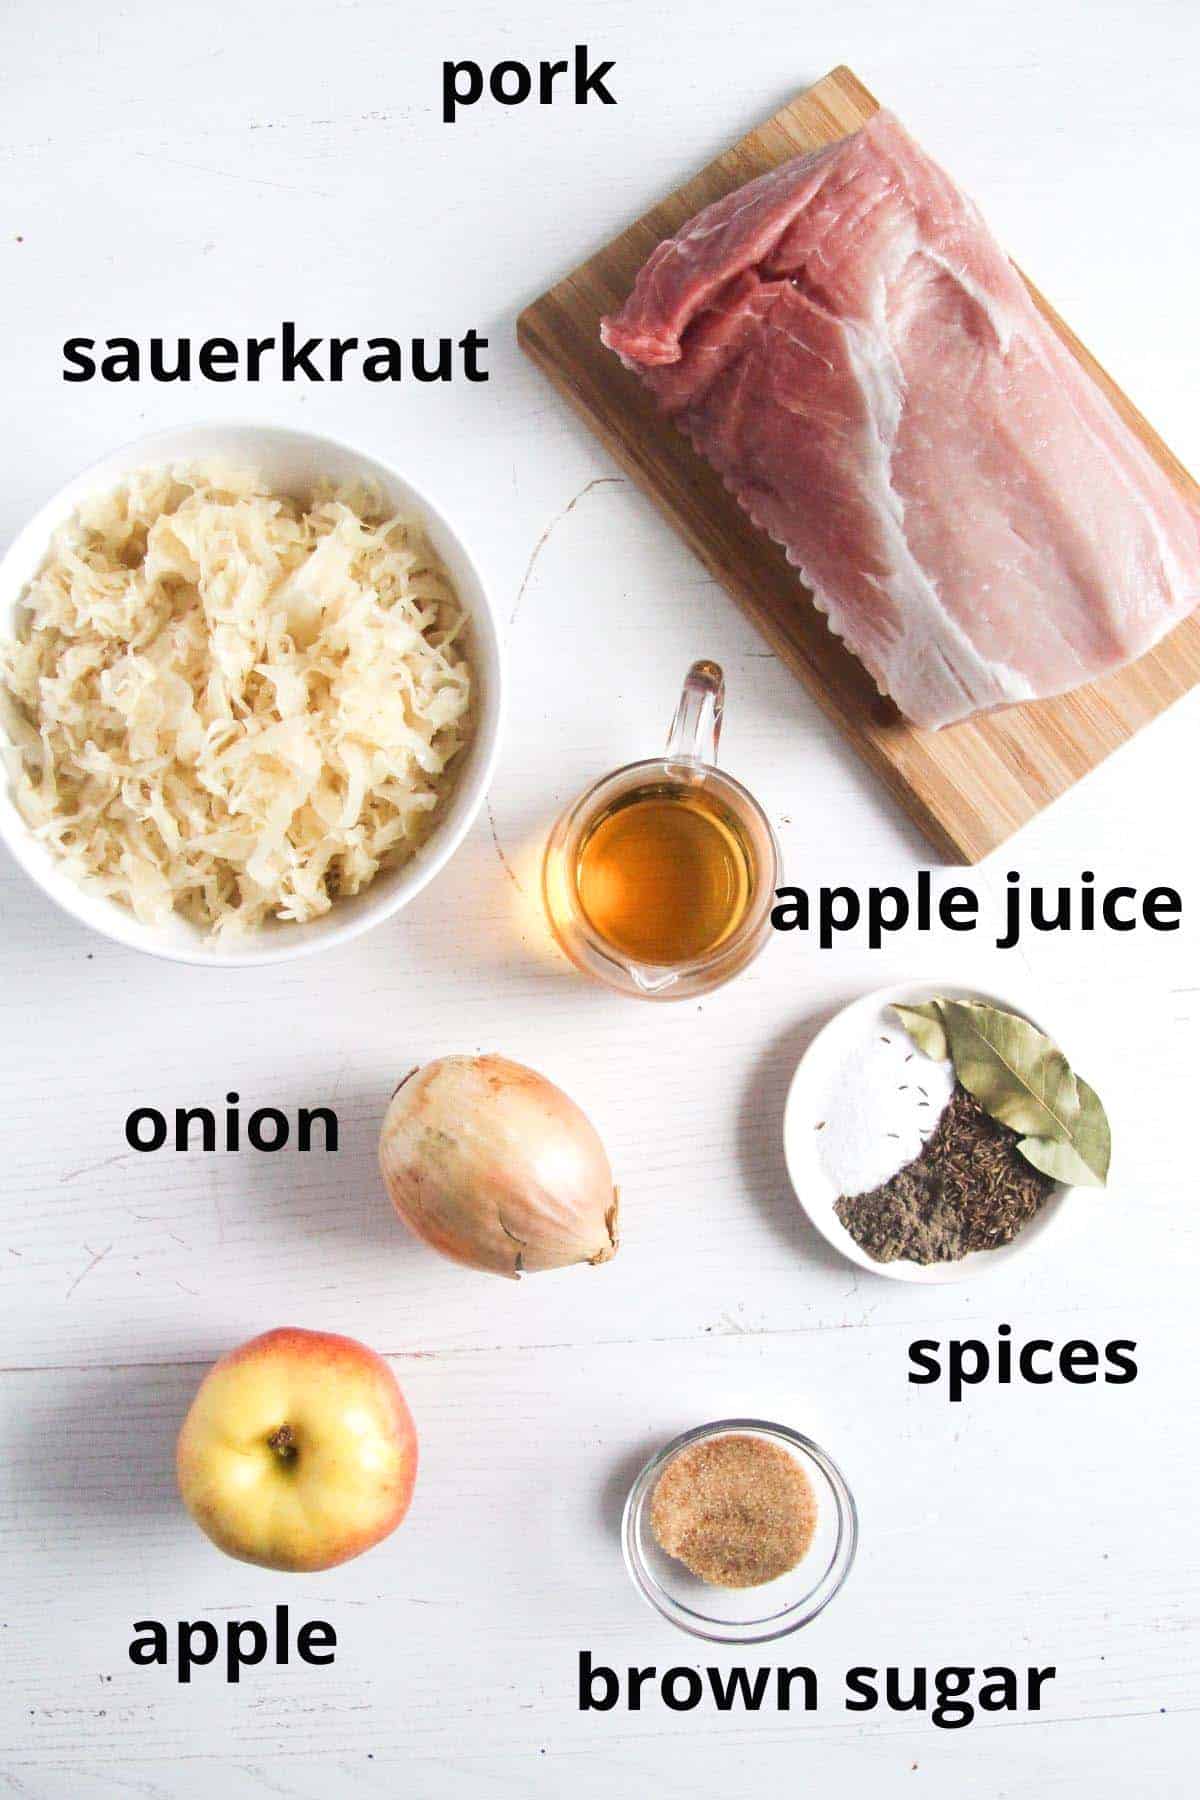 labeled ingredients for pork with sauerkraut on the table.